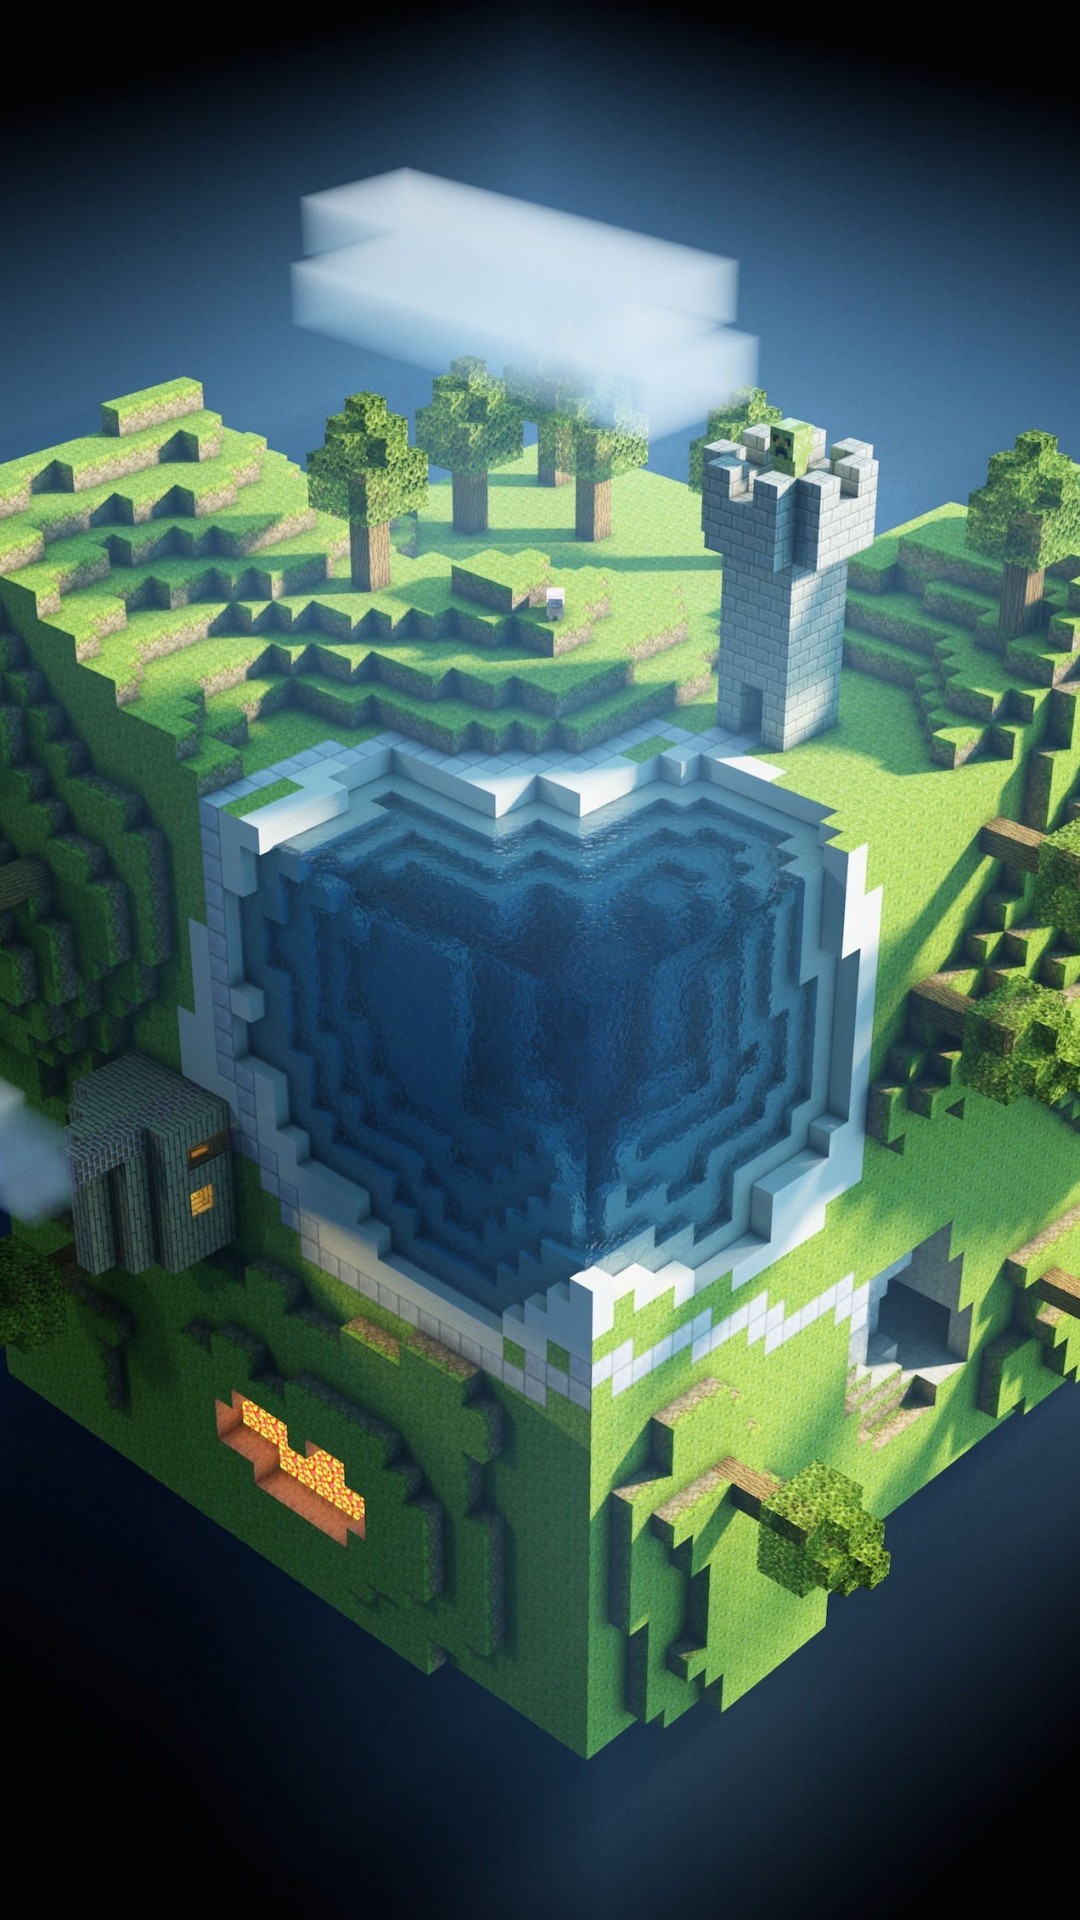 Planet Minecraft Wallpaper for HTC One